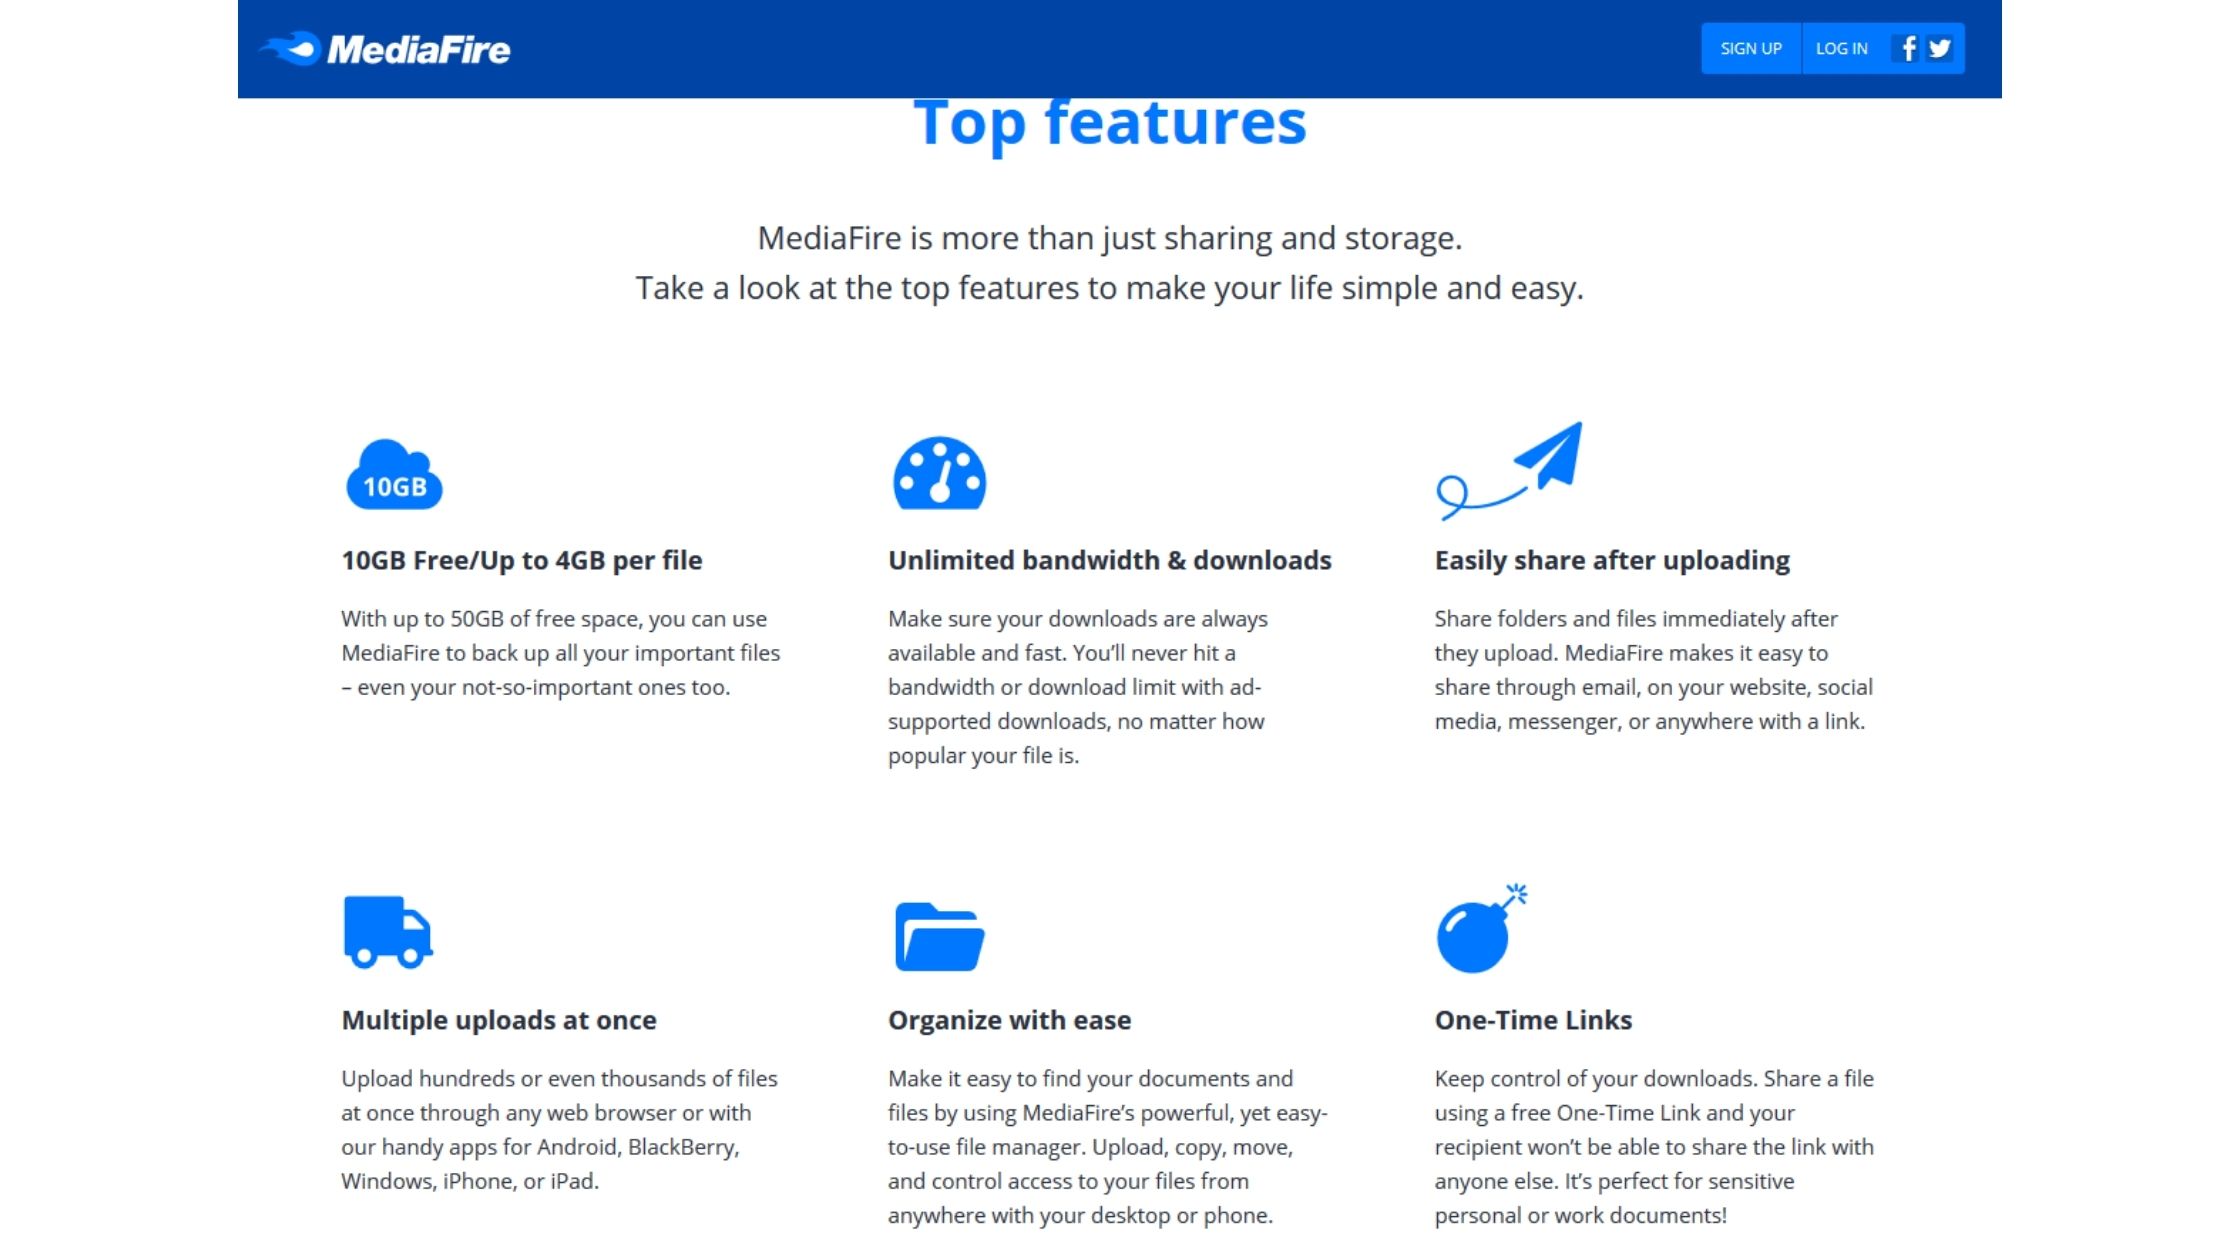 Mediafire features